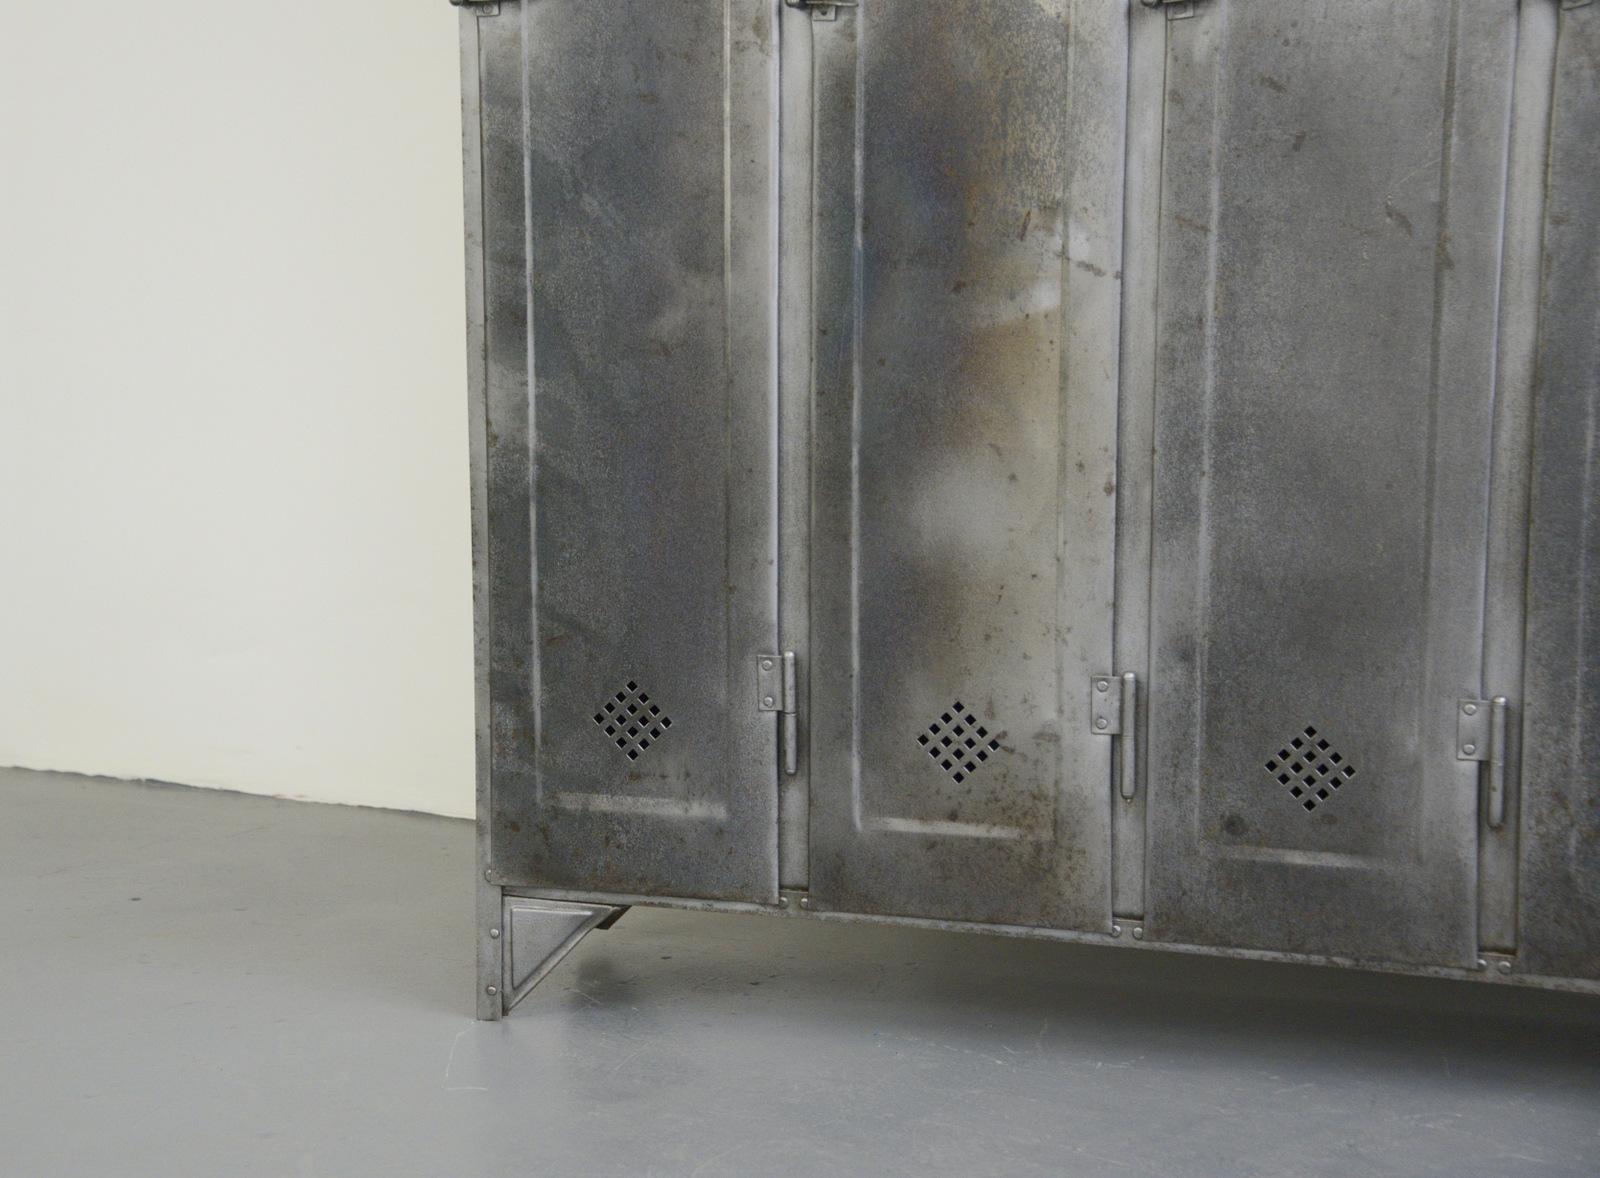 Industrial lockers by Otto Kind, circa 1920s

- Pressed steel doors
- Diamond shaped vents
- Original makers badge
- Each locker has 4 storage shelves
- Made by Otto Kind
- German, 1920s
- Measures: 180cm tall x 150cm wide x 33cm